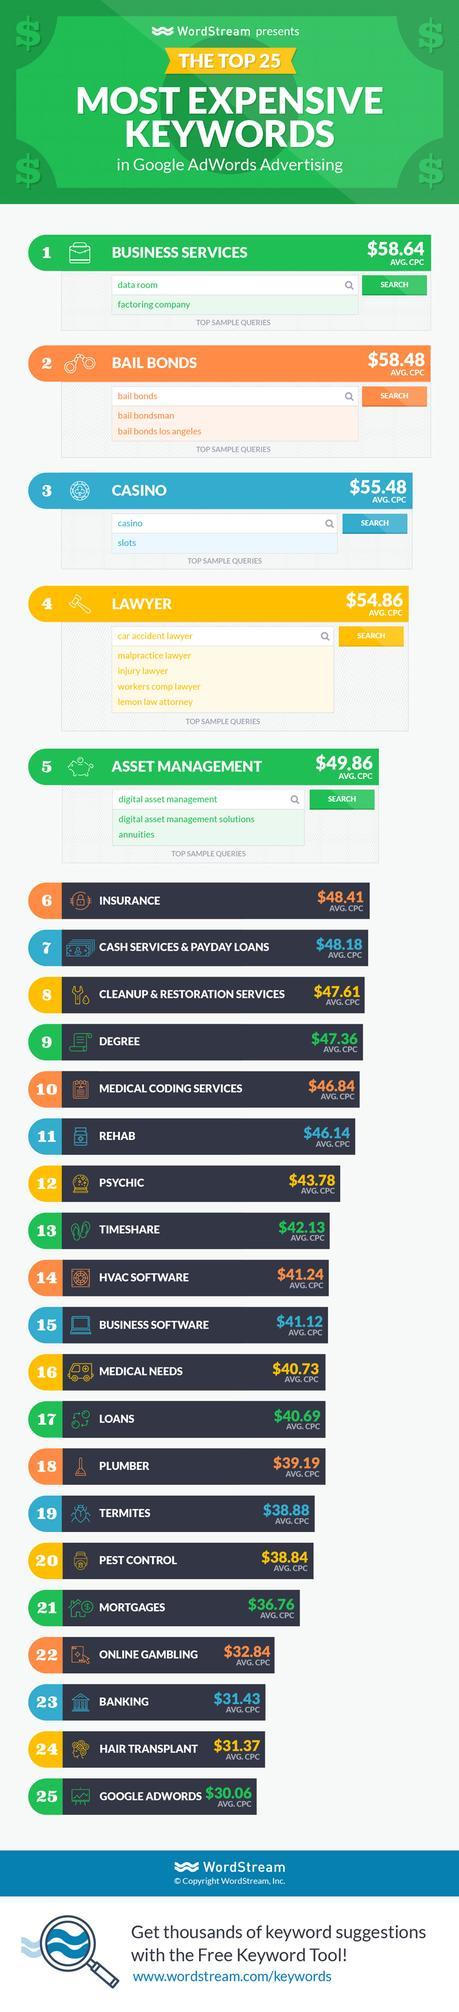 The 25 Most Expensive Adwords Keywords of 2017 (Why they are so $$$ Expensive?)